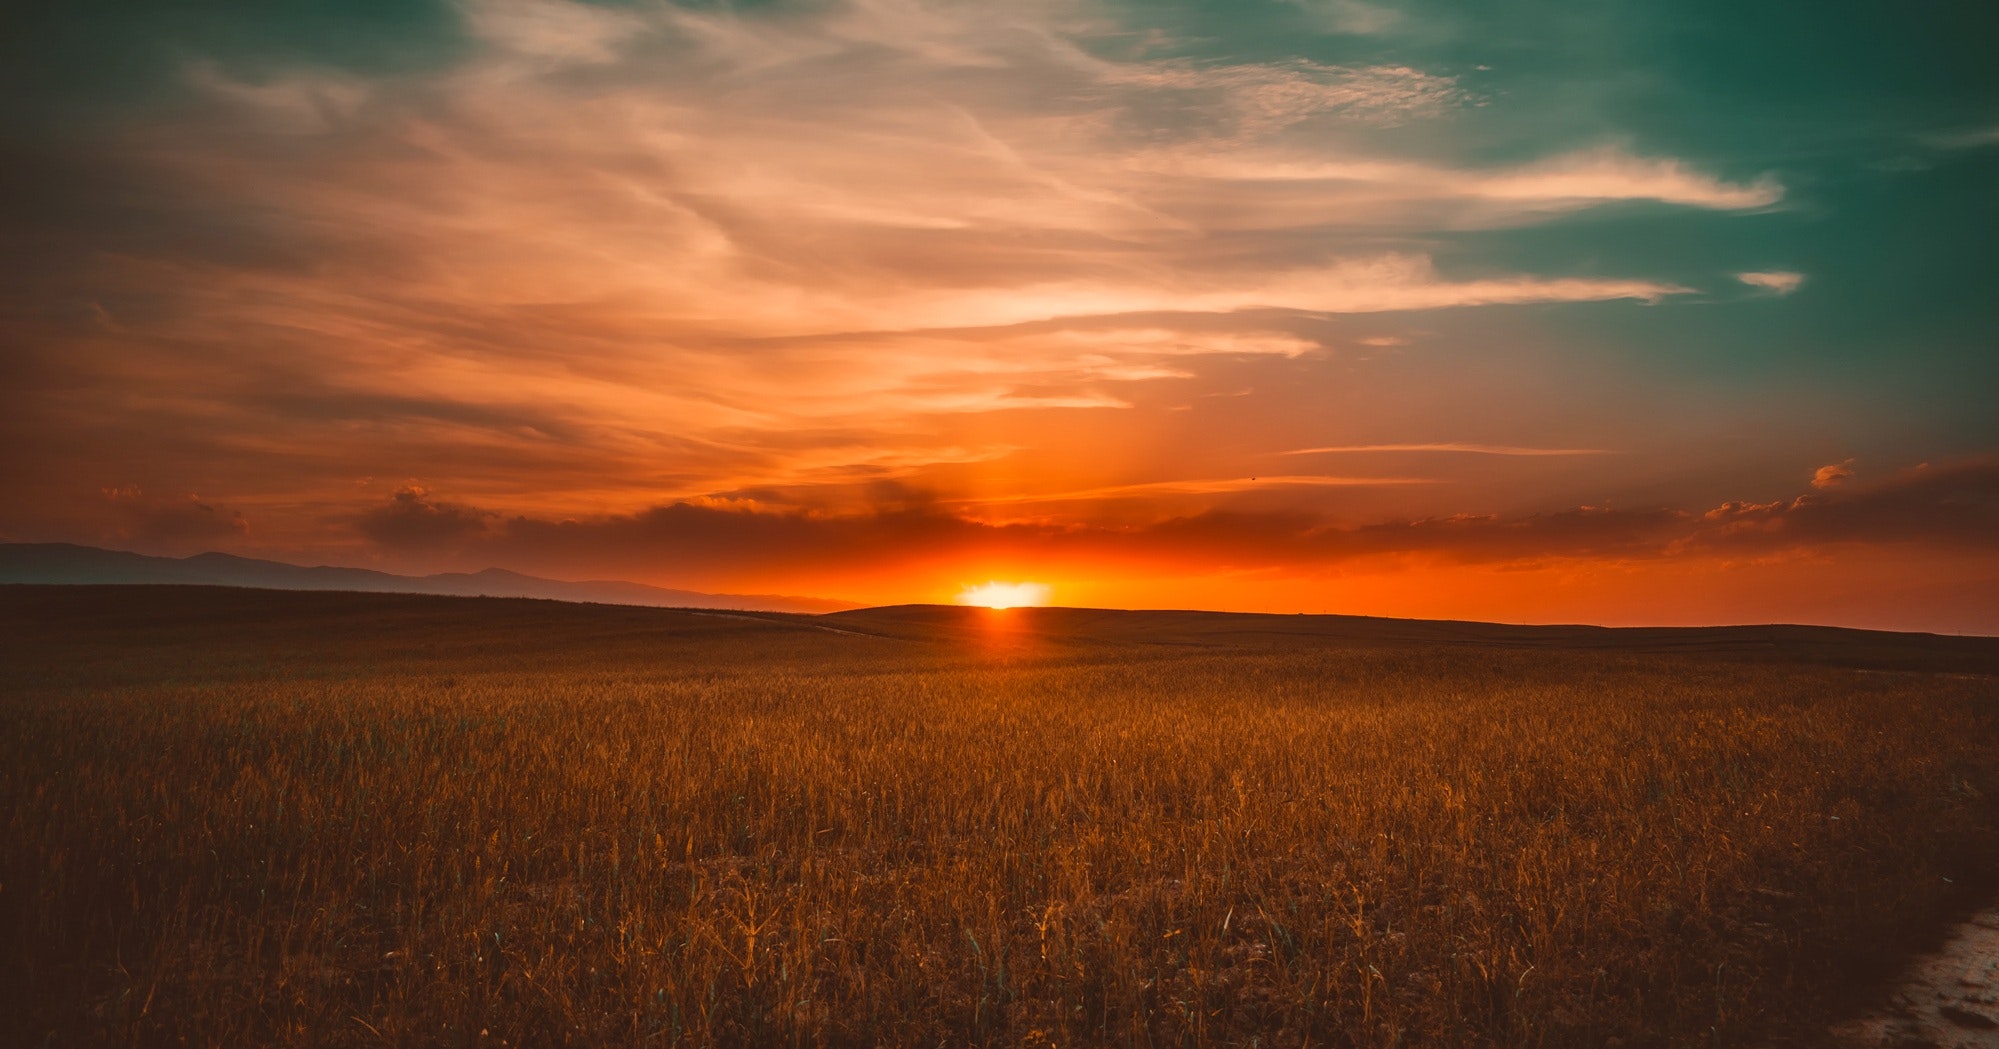 A photograph of a sunrise over a field of grain.